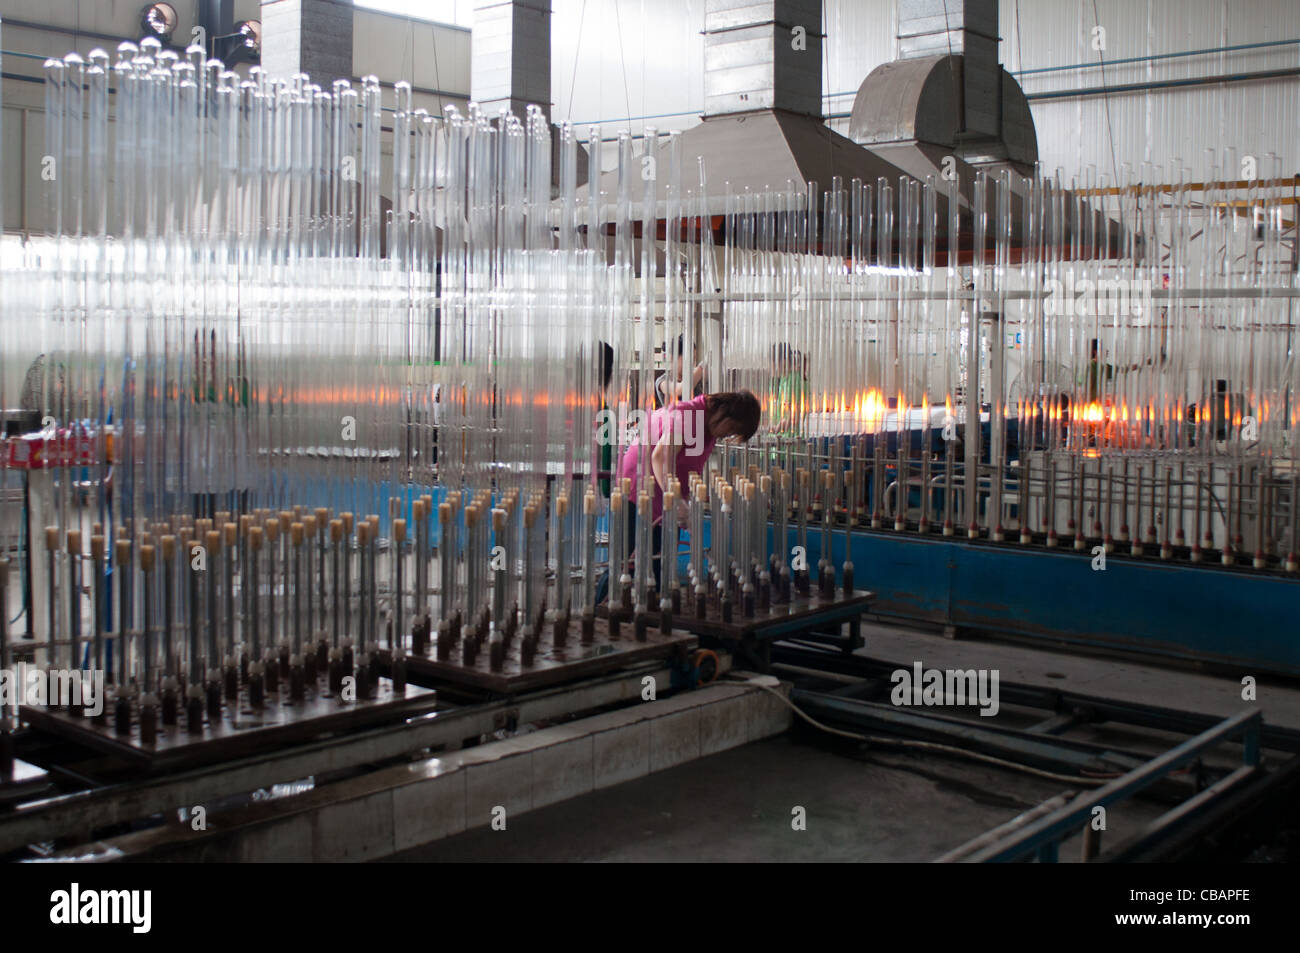 A worker in the Himin Solar Corporation, a Chinese factory leader in producing solar water heaters. China Solar Valley, Dezhou, Shandong, China Stock Photo